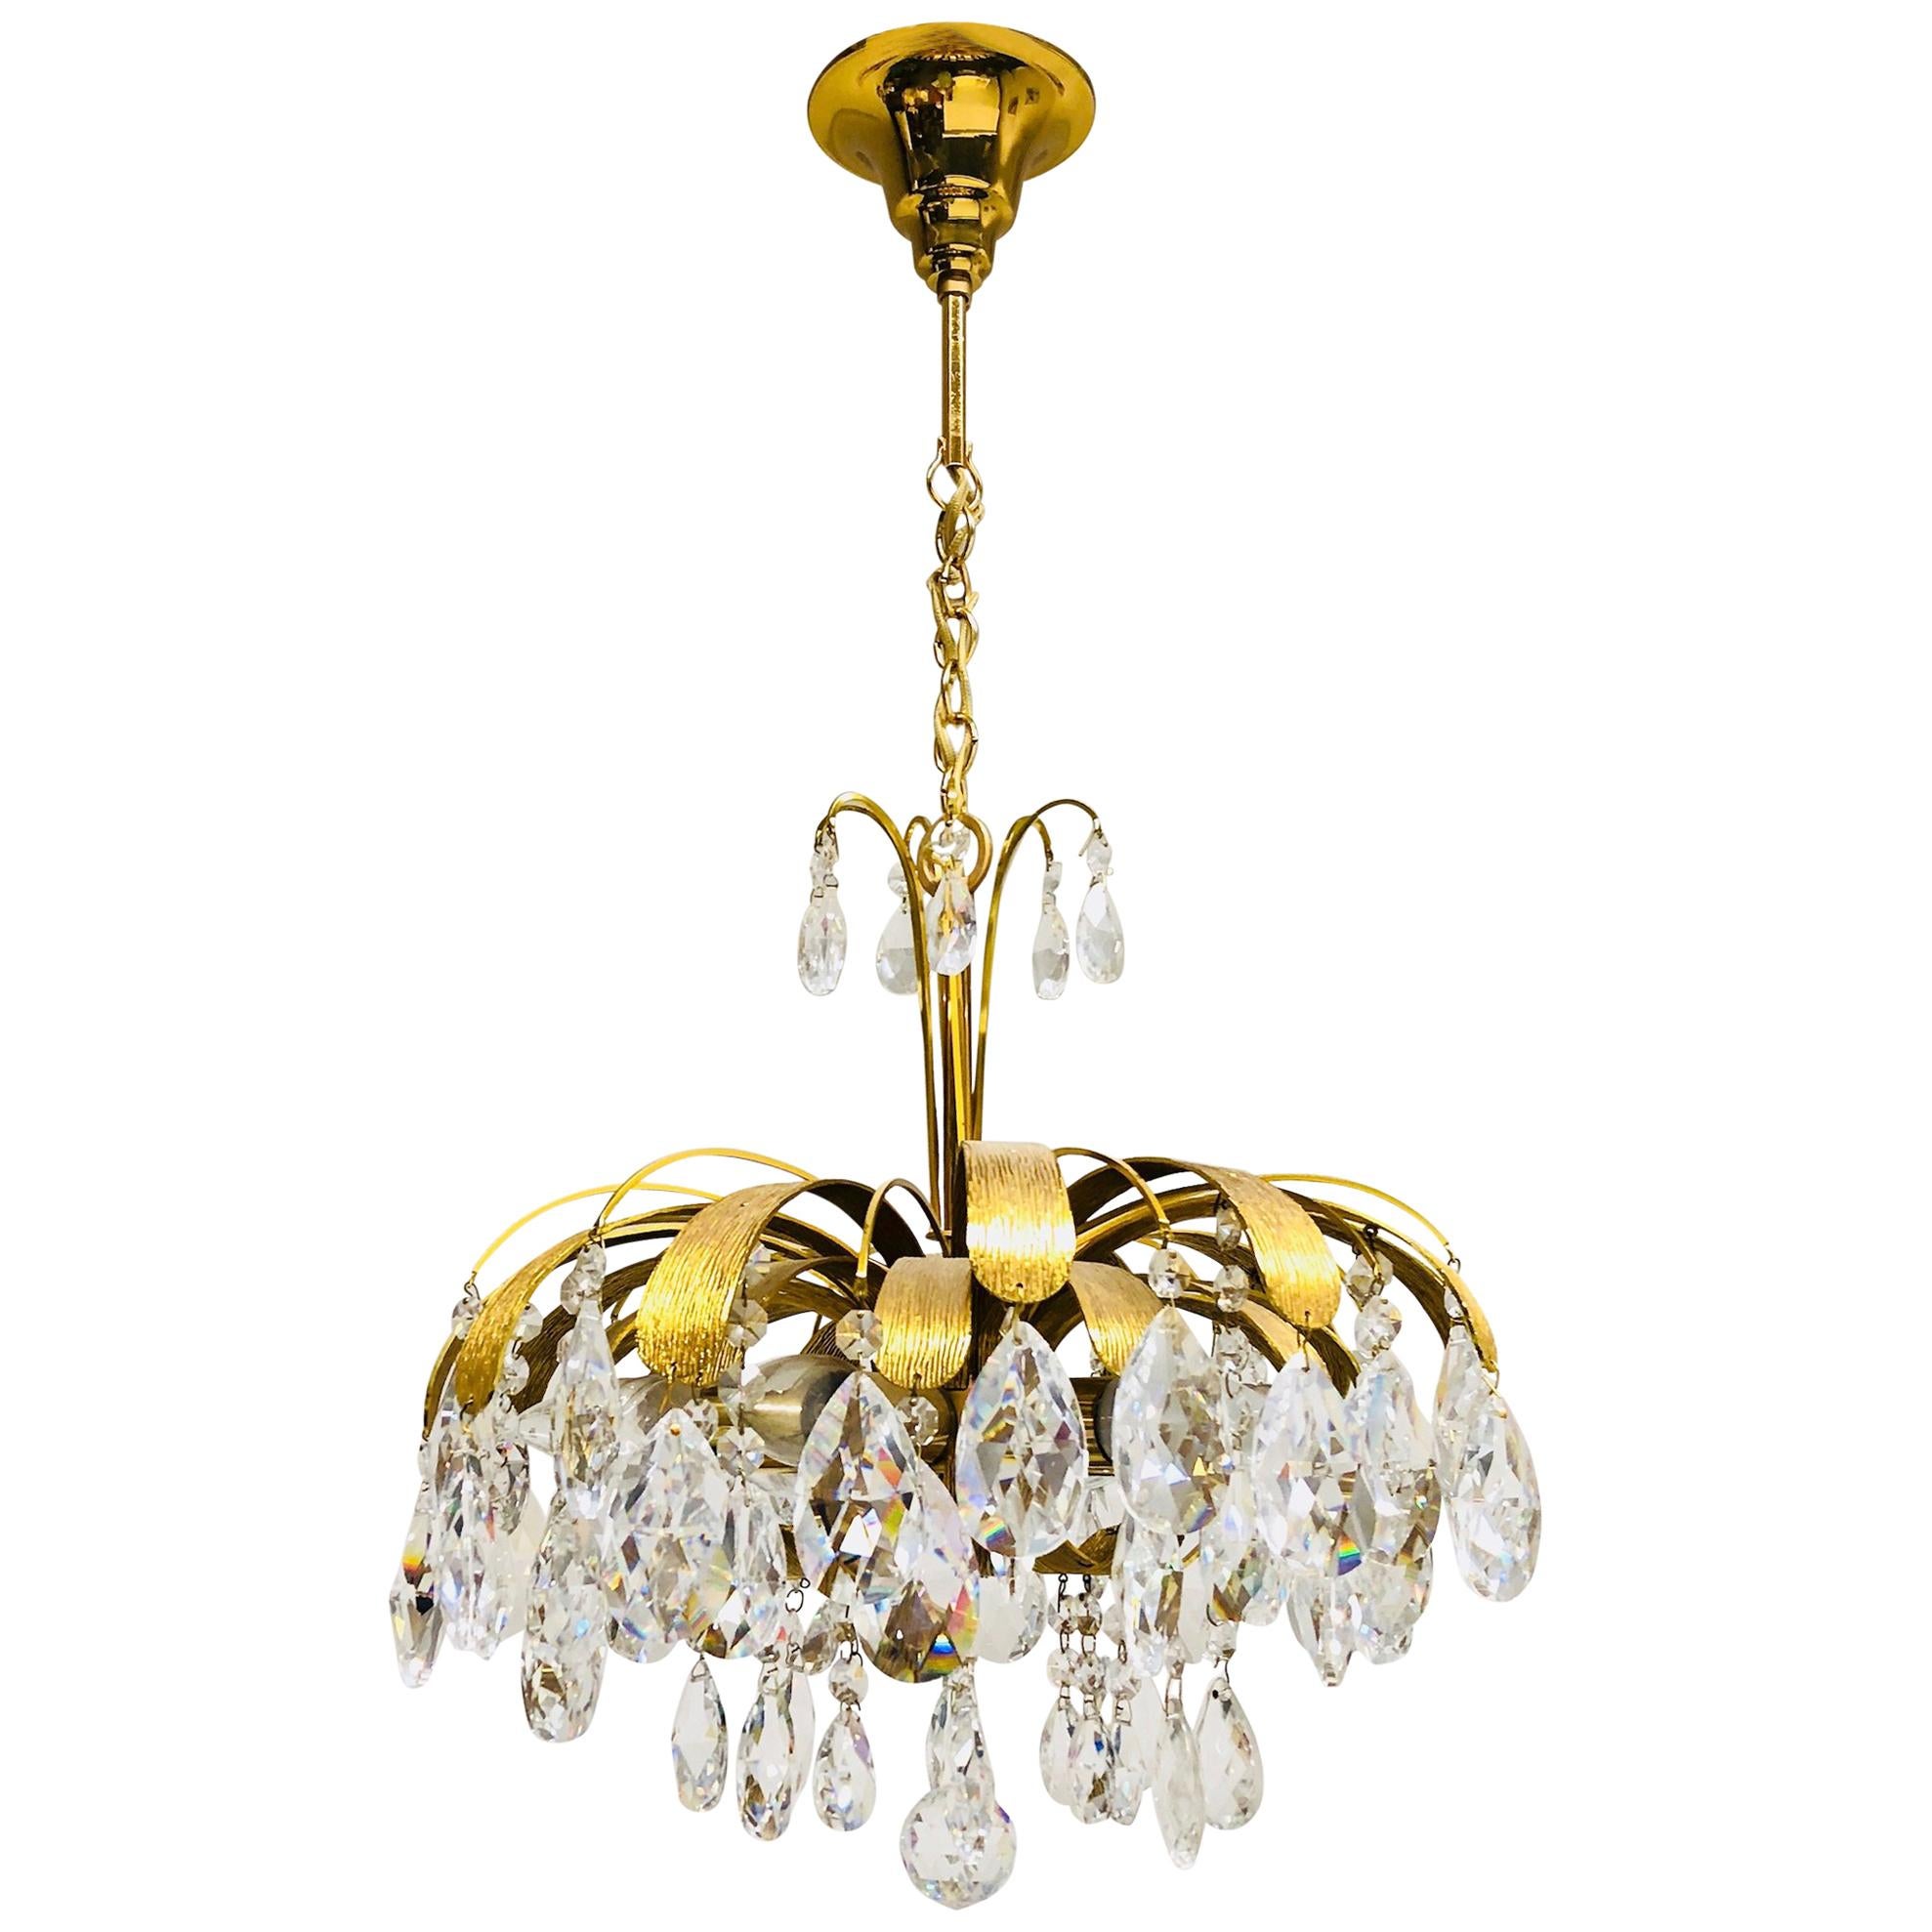 Stunning Beautiful Gold-Plated “The Palm" Chandelier by Palwa, 1960s